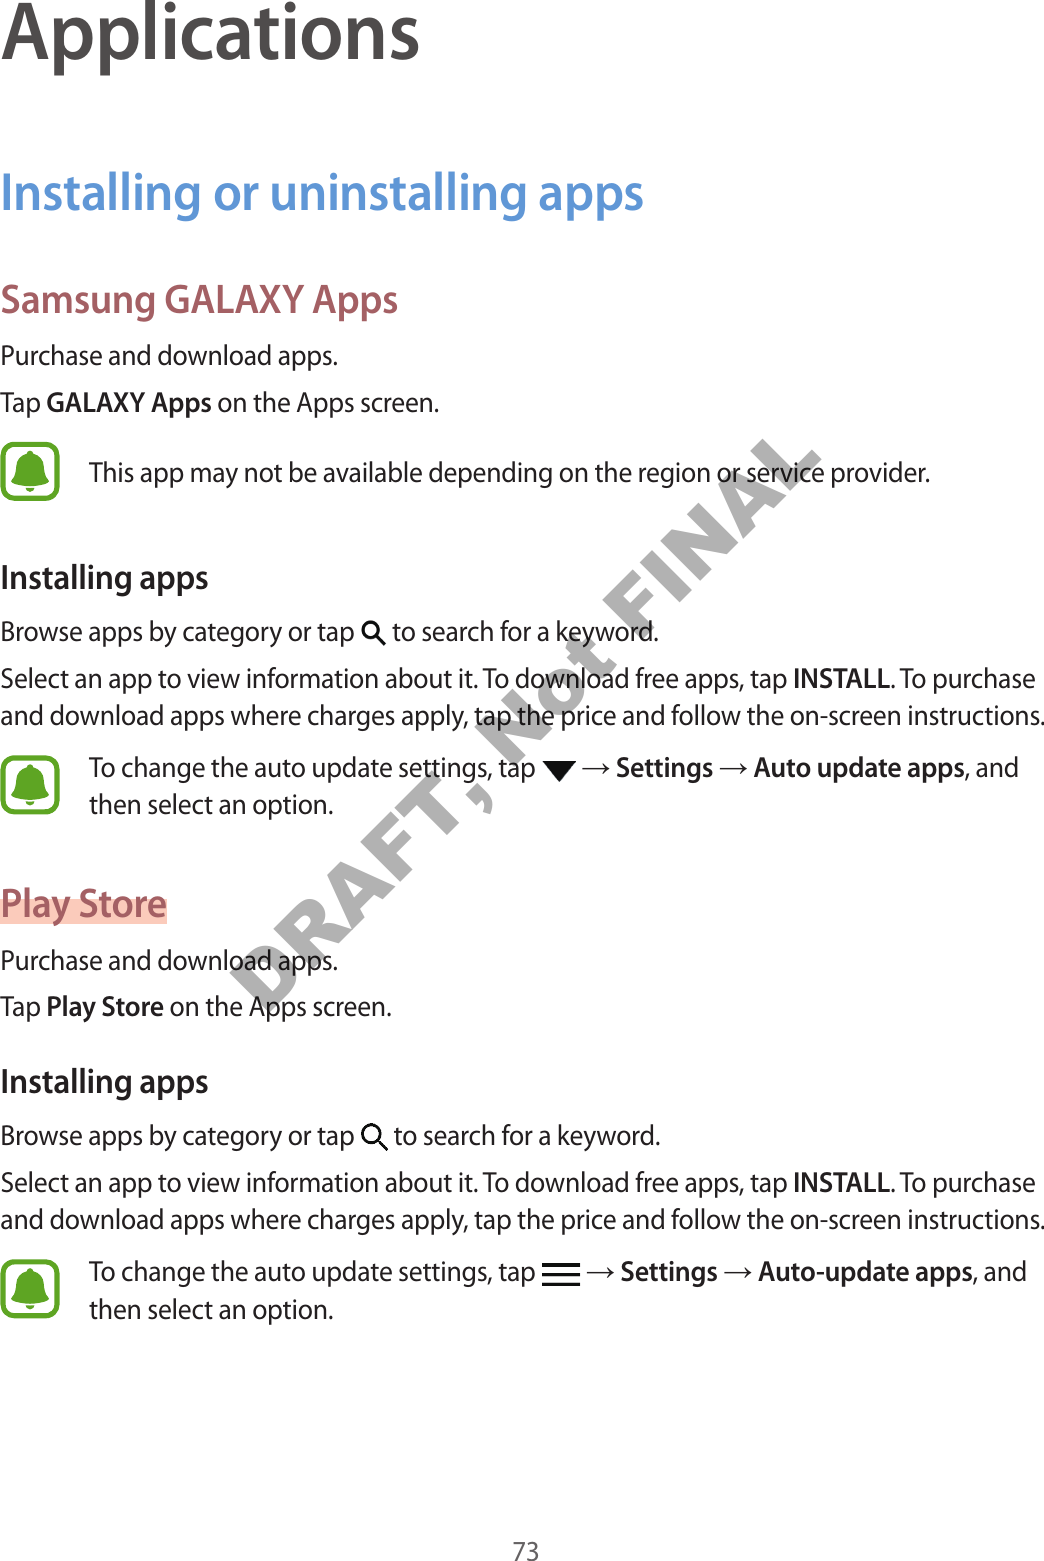 73ApplicationsInstalling or uninstalling appsSamsung GALAXY AppsPurchase and download apps.Tap GALAXY Apps on the Apps screen.This app may not be available depending on the region or service provider.Installing appsBrowse apps by category or tap   to search for a keyword.Select an app to view information about it. To download free apps, tap INSTALL. To purchase and download apps where charges apply, tap the price and follow the on-screen instructions.To change the auto update settings, tap   → Settings → Auto update apps, and then select an option.Play StorePurchase and download apps.Tap Play Store on the Apps screen.Installing appsBrowse apps by category or tap   to search for a keyword.Select an app to view information about it. To download free apps, tap INSTALL. To purchase and download apps where charges apply, tap the price and follow the on-screen instructions.To change the auto update settings, tap   → Settings → Auto-update apps, and then select an option.DRAFT, Not FINAL